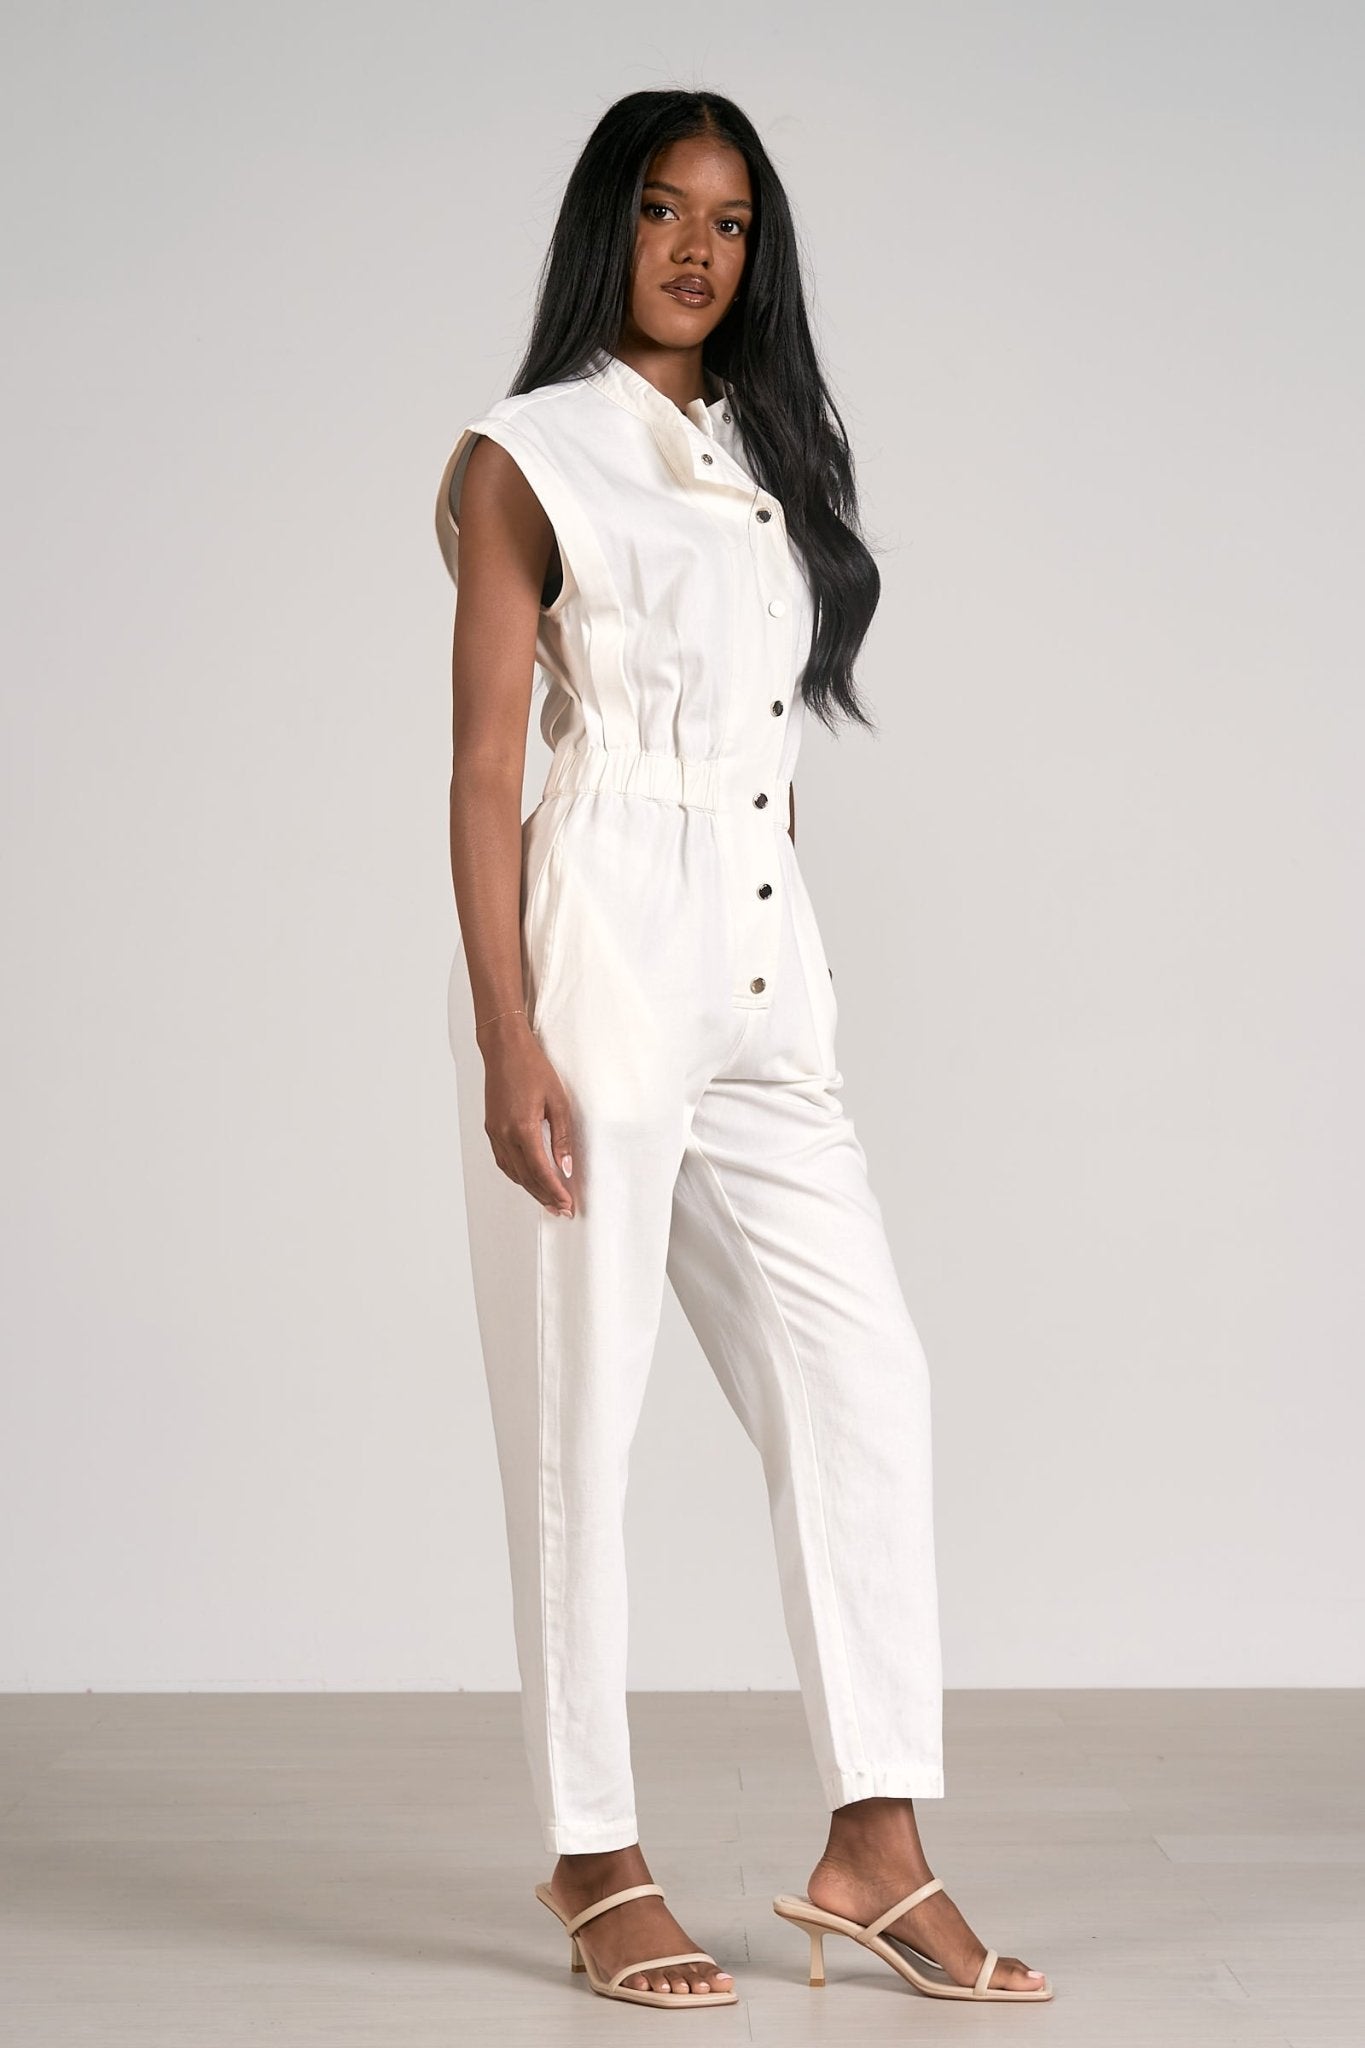 Women's Jumpsuits - Playsuits | BSB Fashion